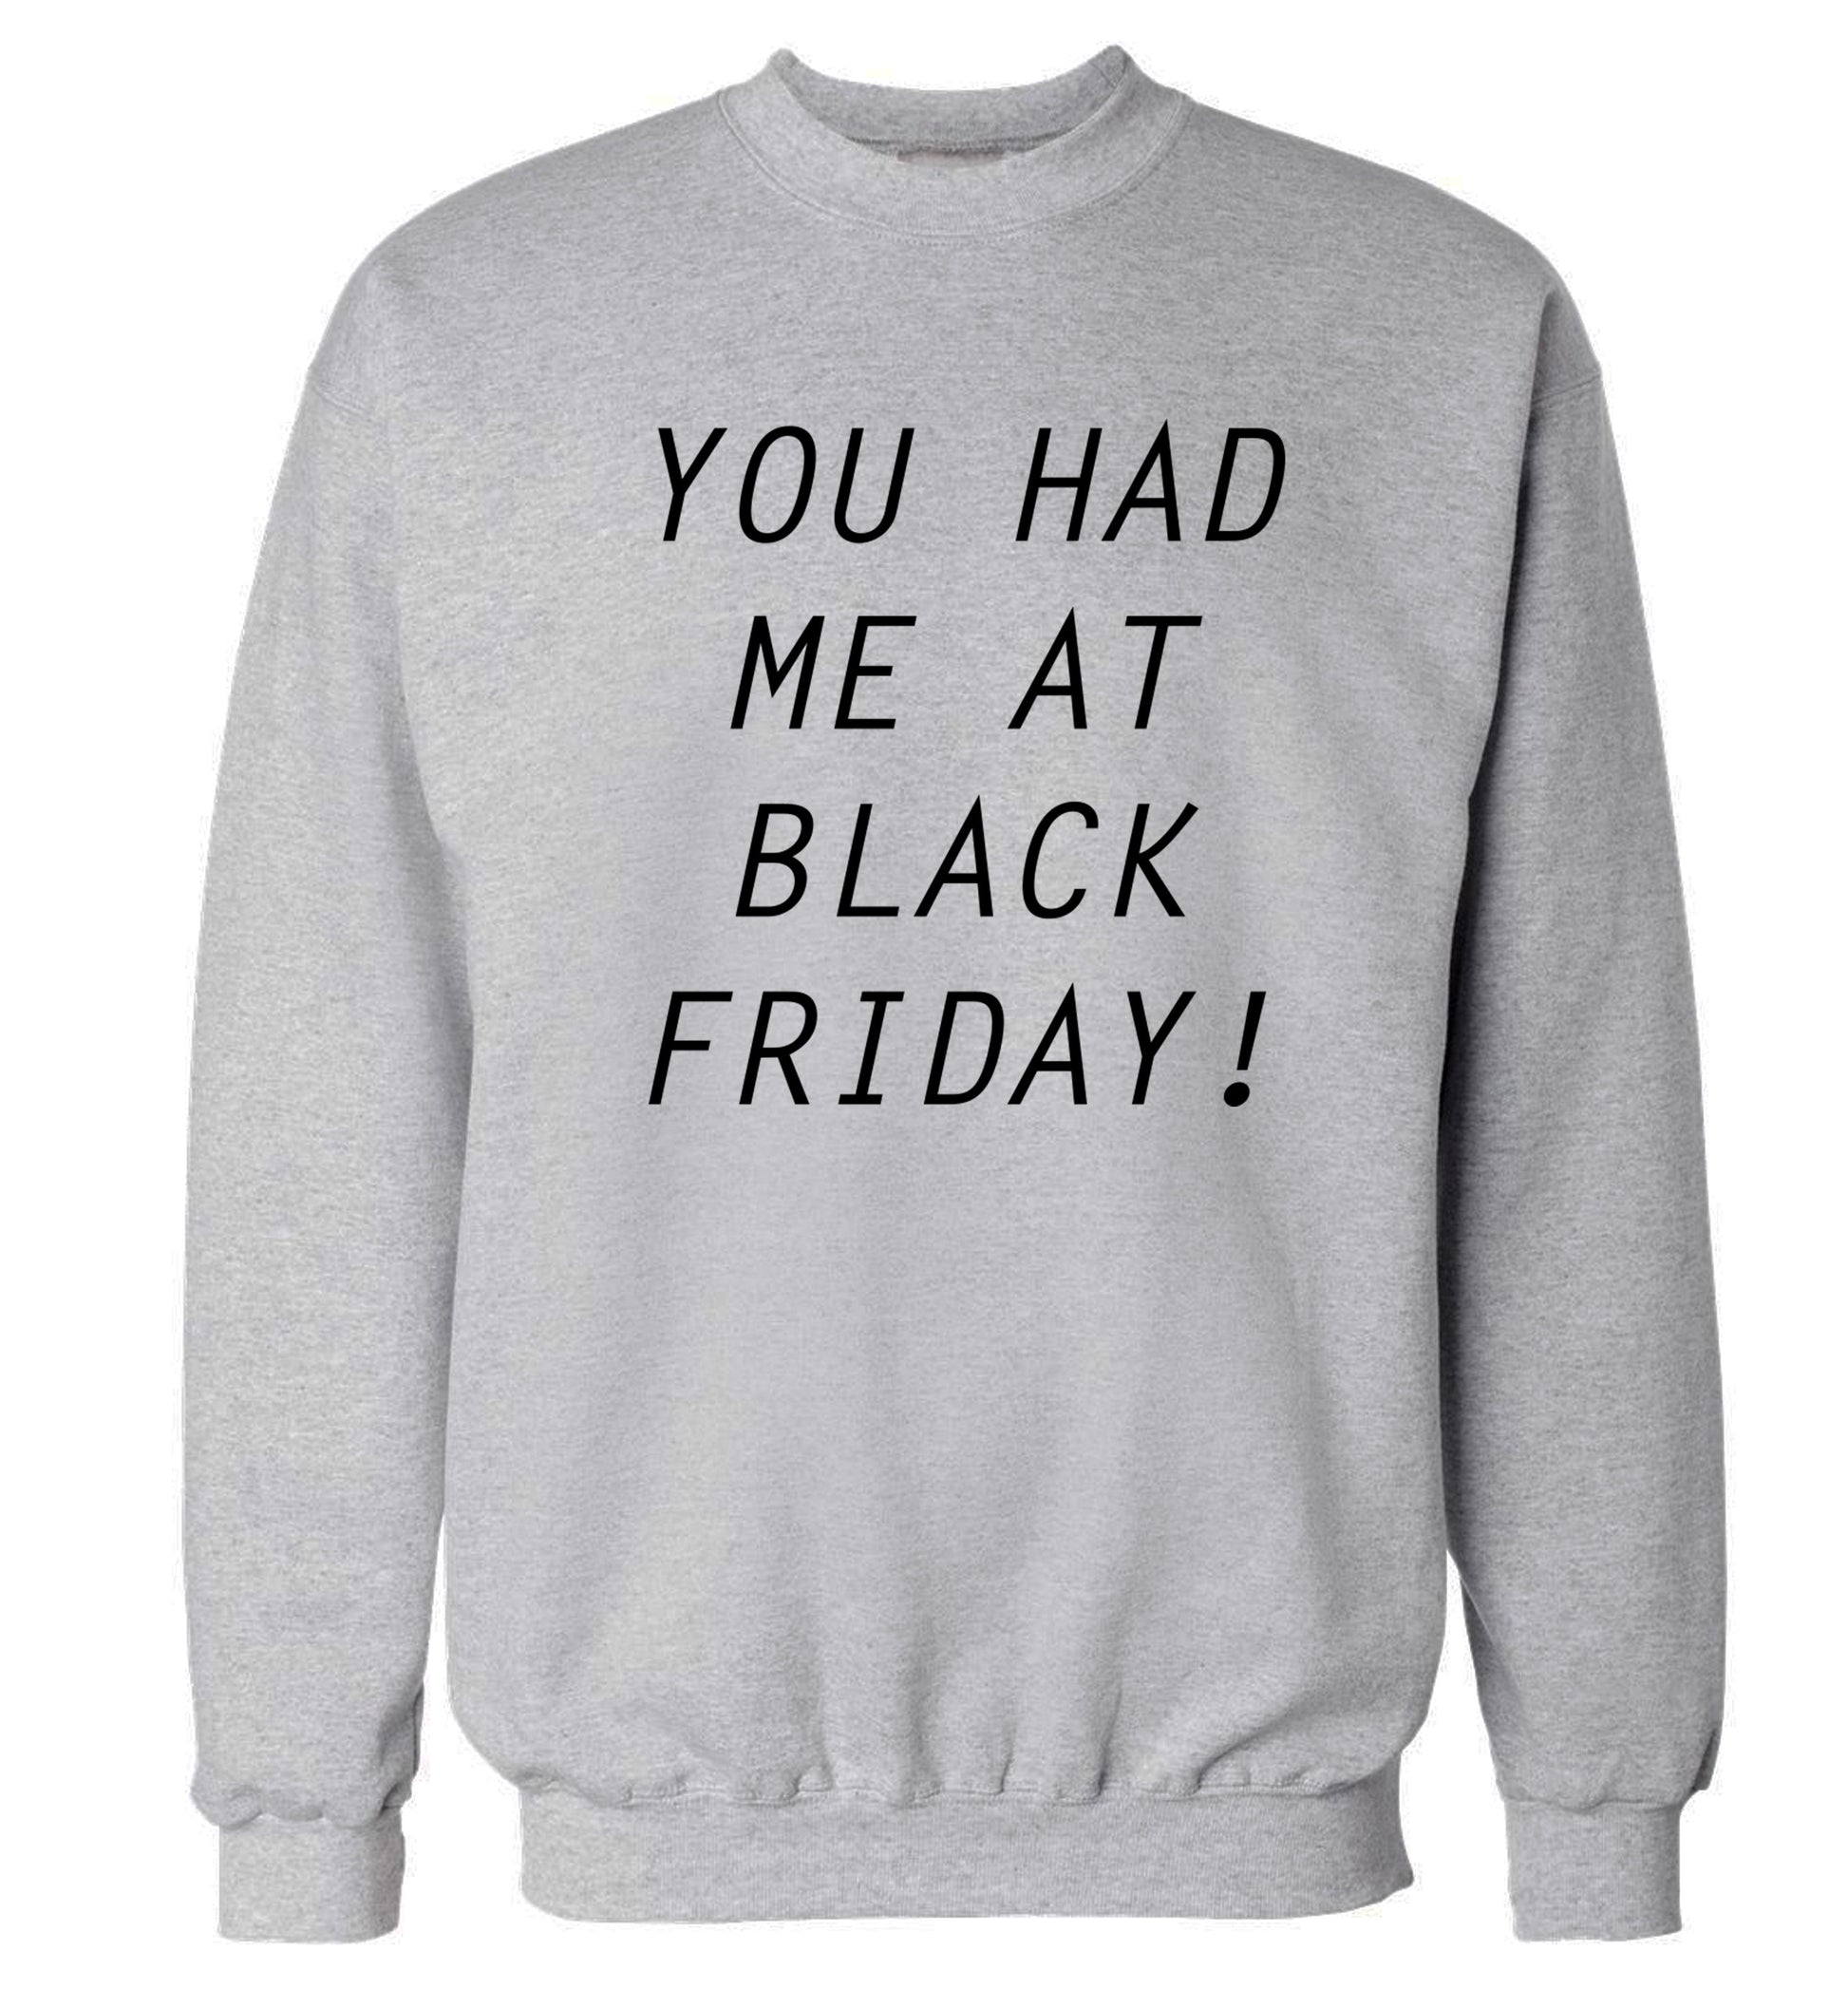 You had me at black friday Adult's unisex grey Sweater 2XL